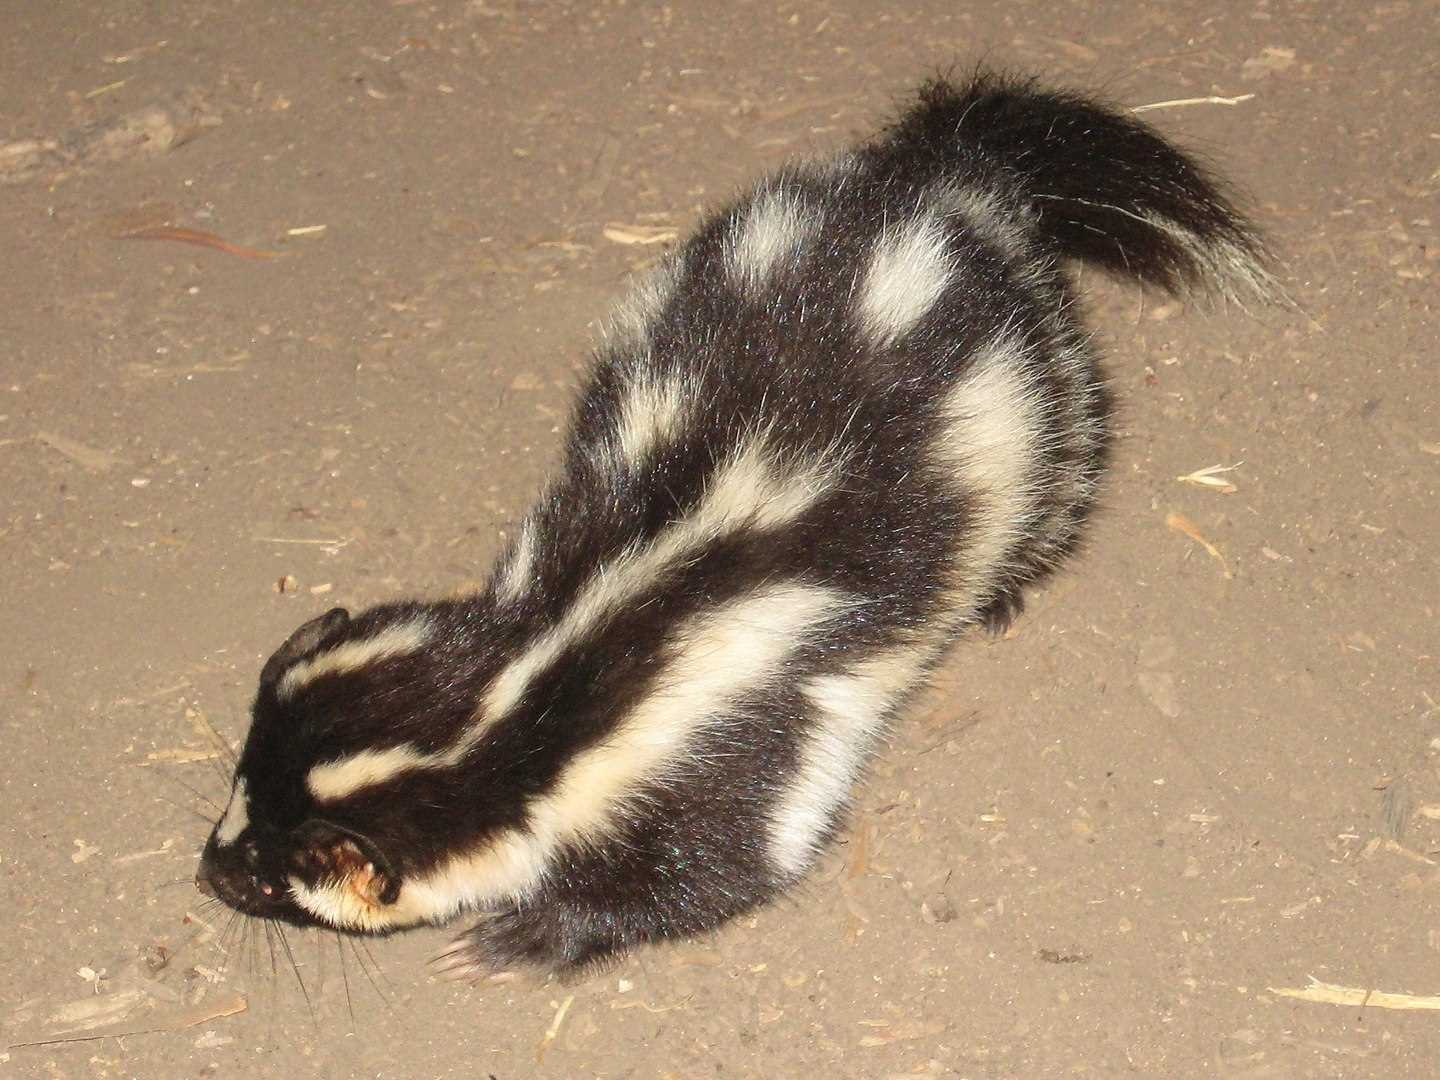 Channel Islands Spotted Skunk PD.jpg